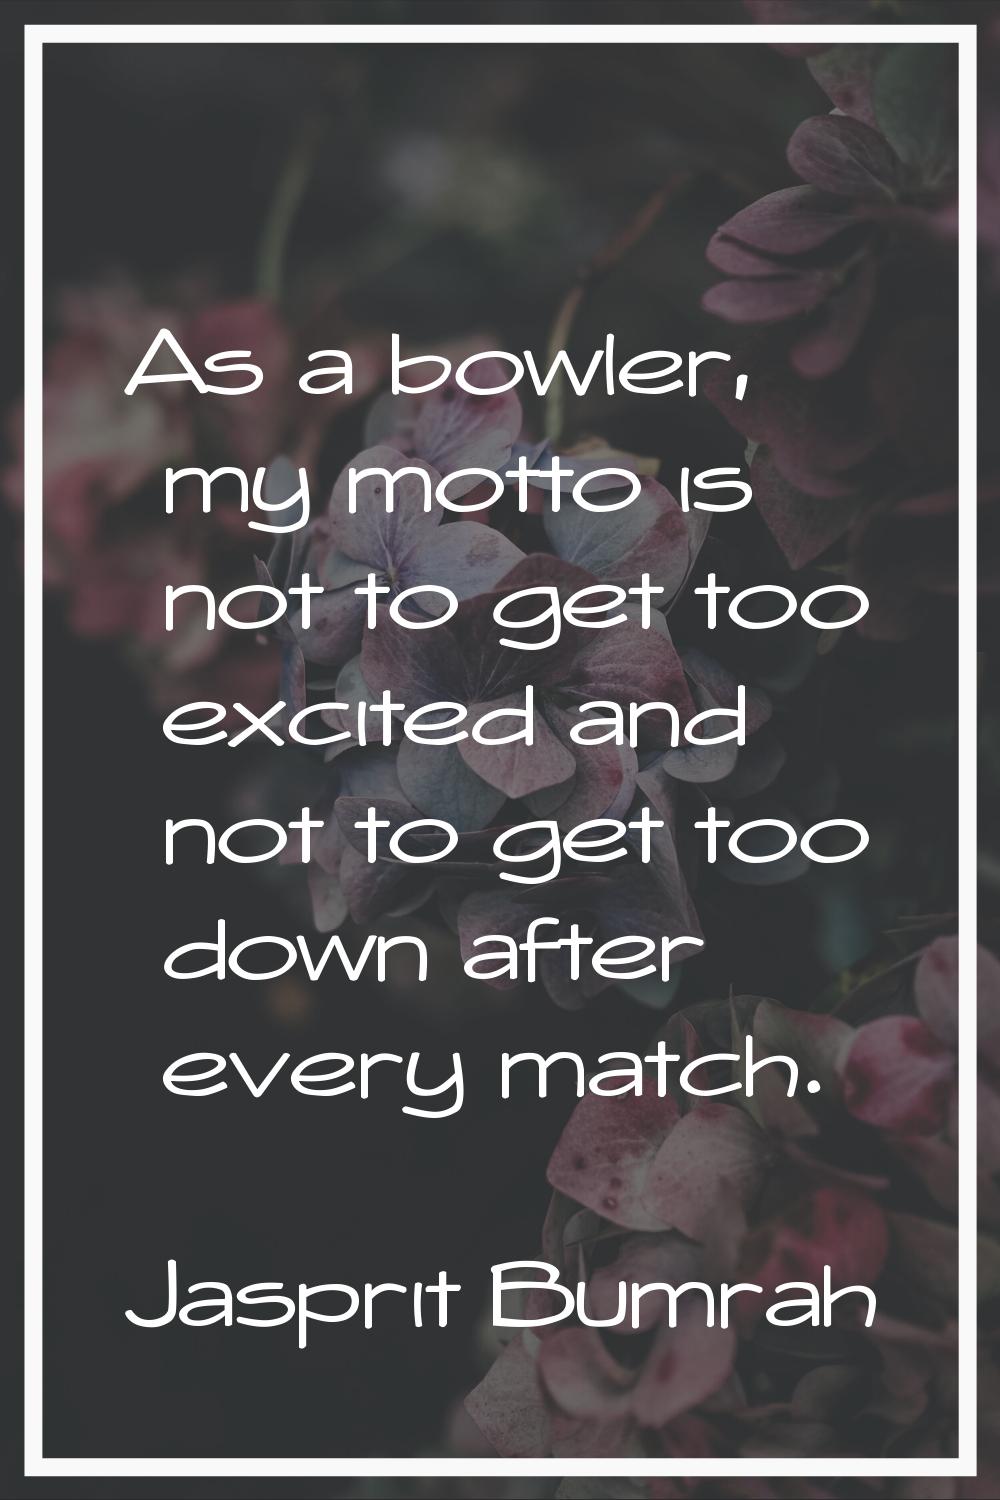 As a bowler, my motto is not to get too excited and not to get too down after every match.